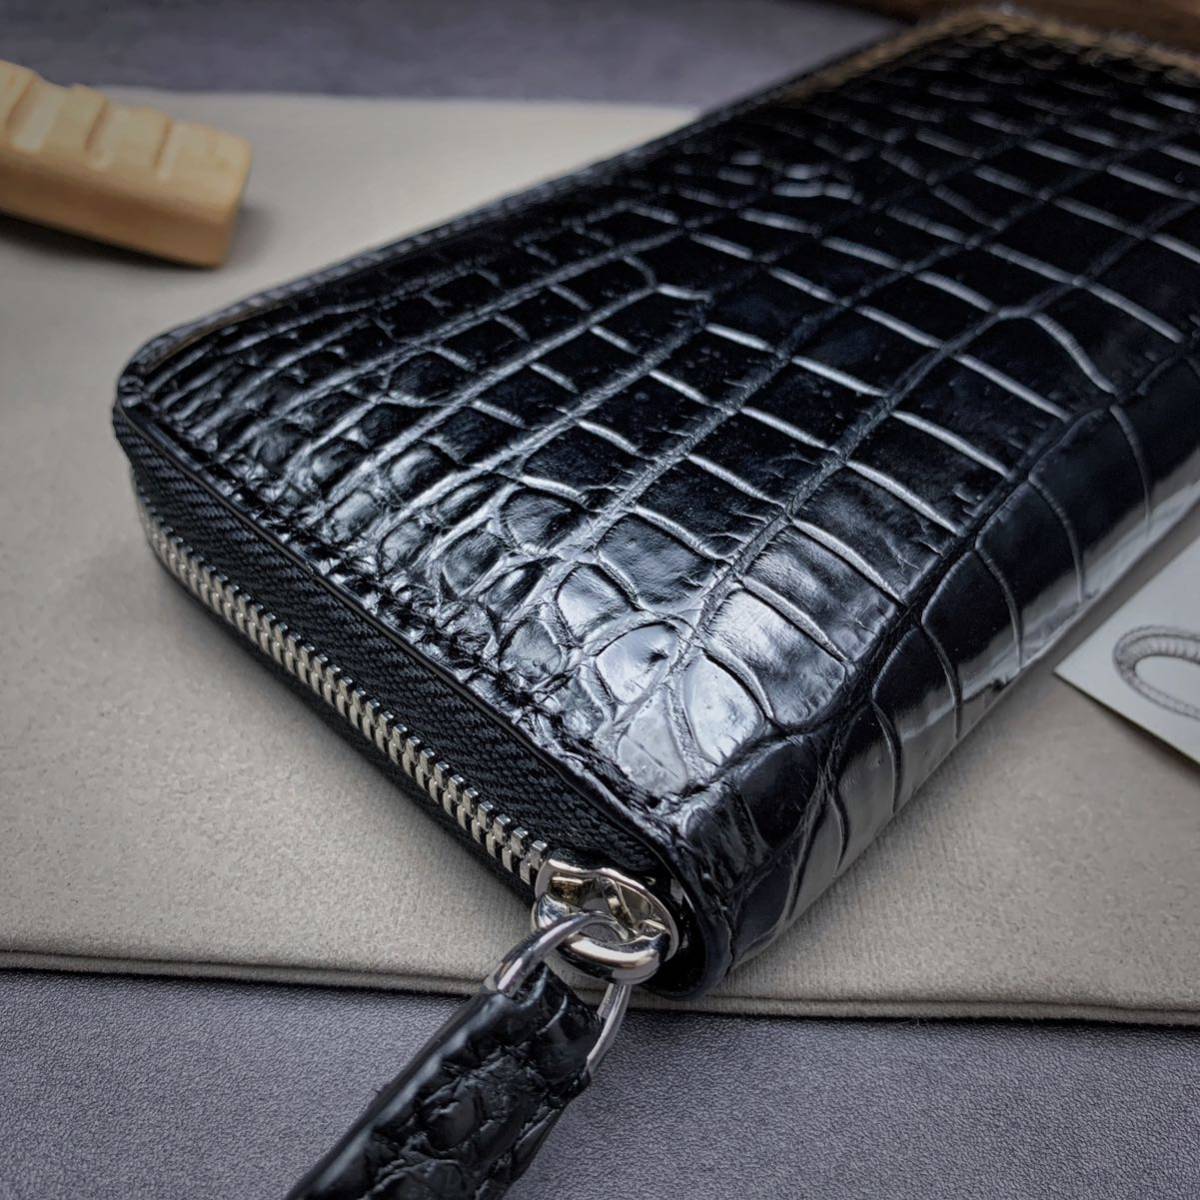  standard [ center one sheets leather ] crocodile wani leather long wallet round fastener genuine article guarantee . leather use change purse . equipped . leather business purse the truth thing photograph 